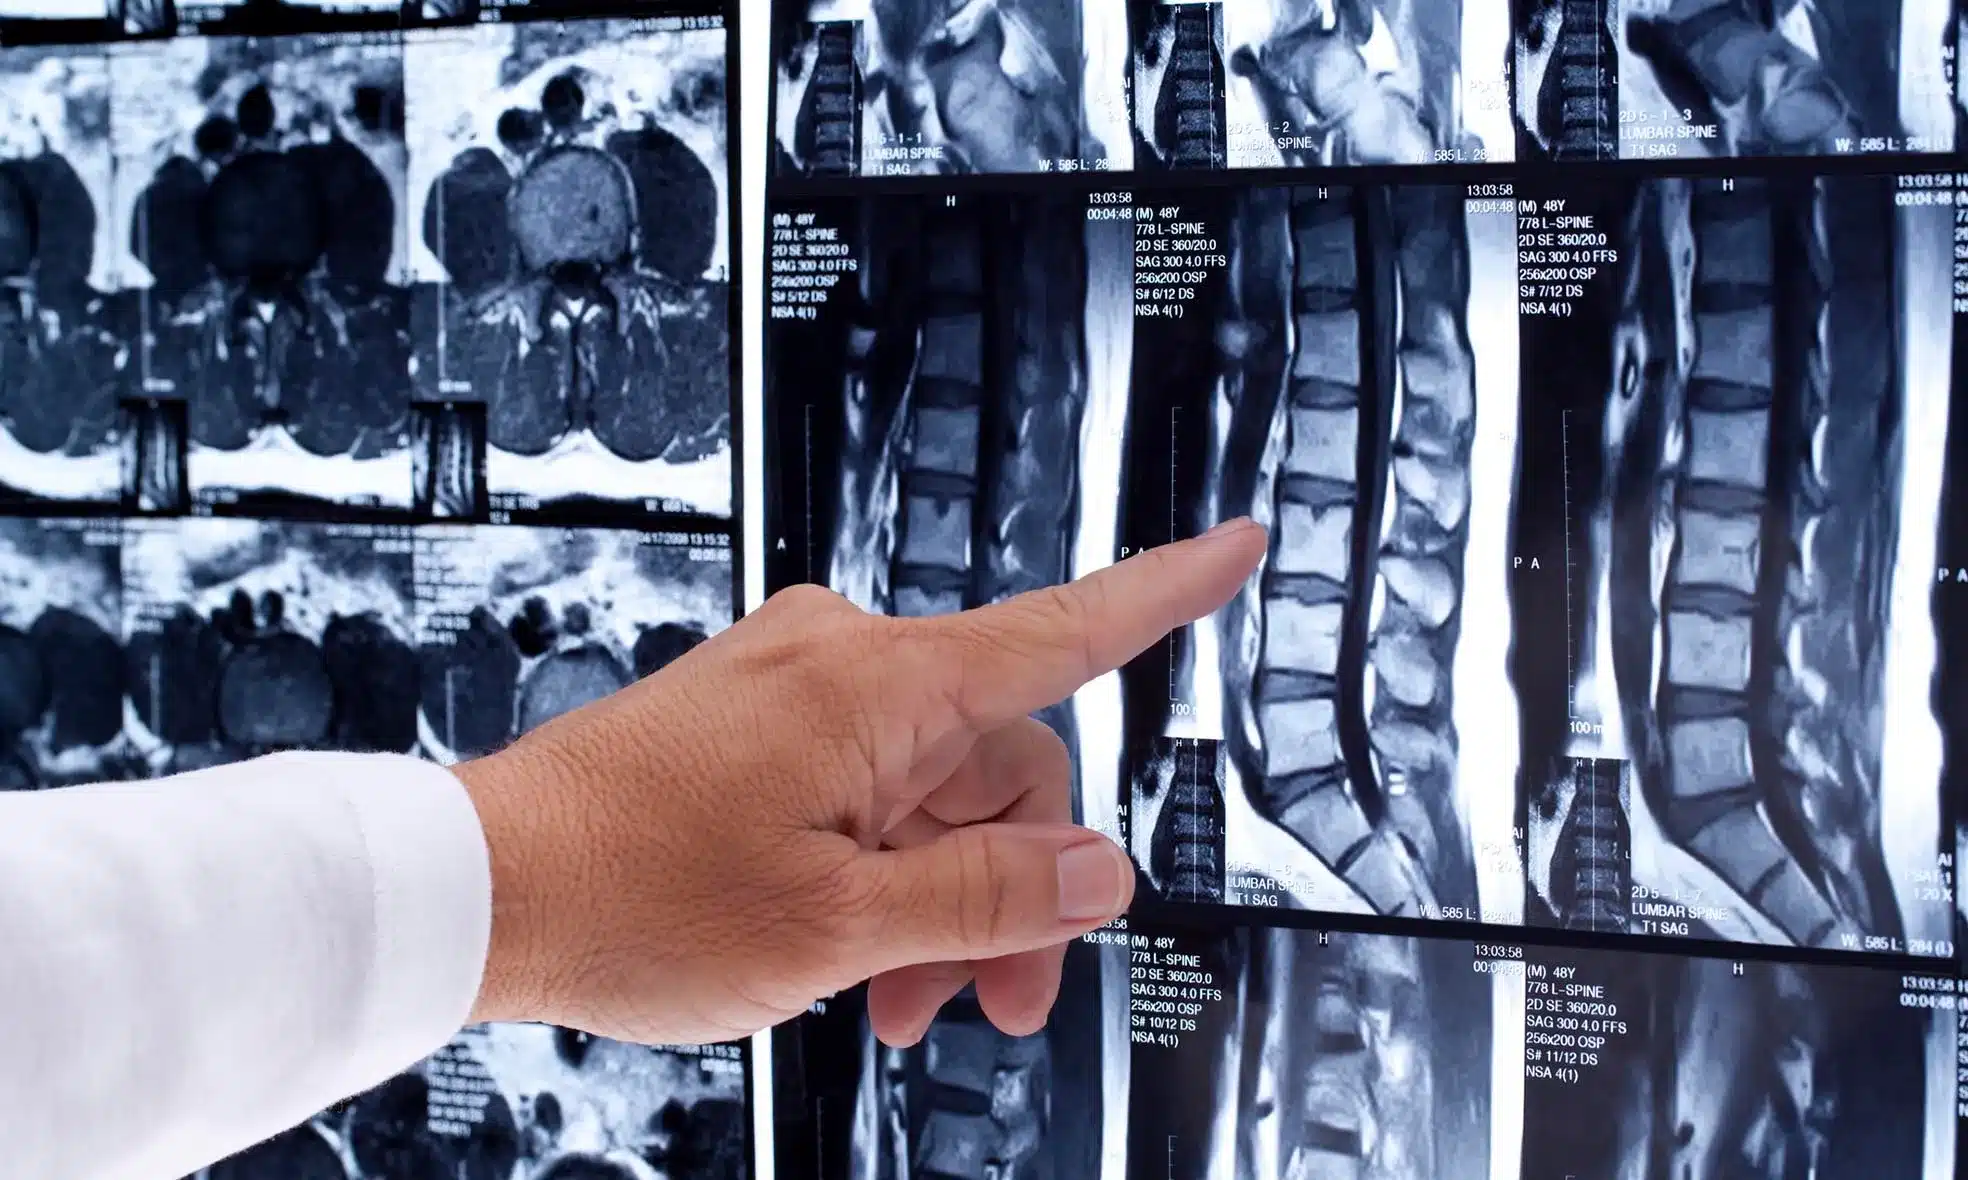 Spinal Cord Injuries Attorney